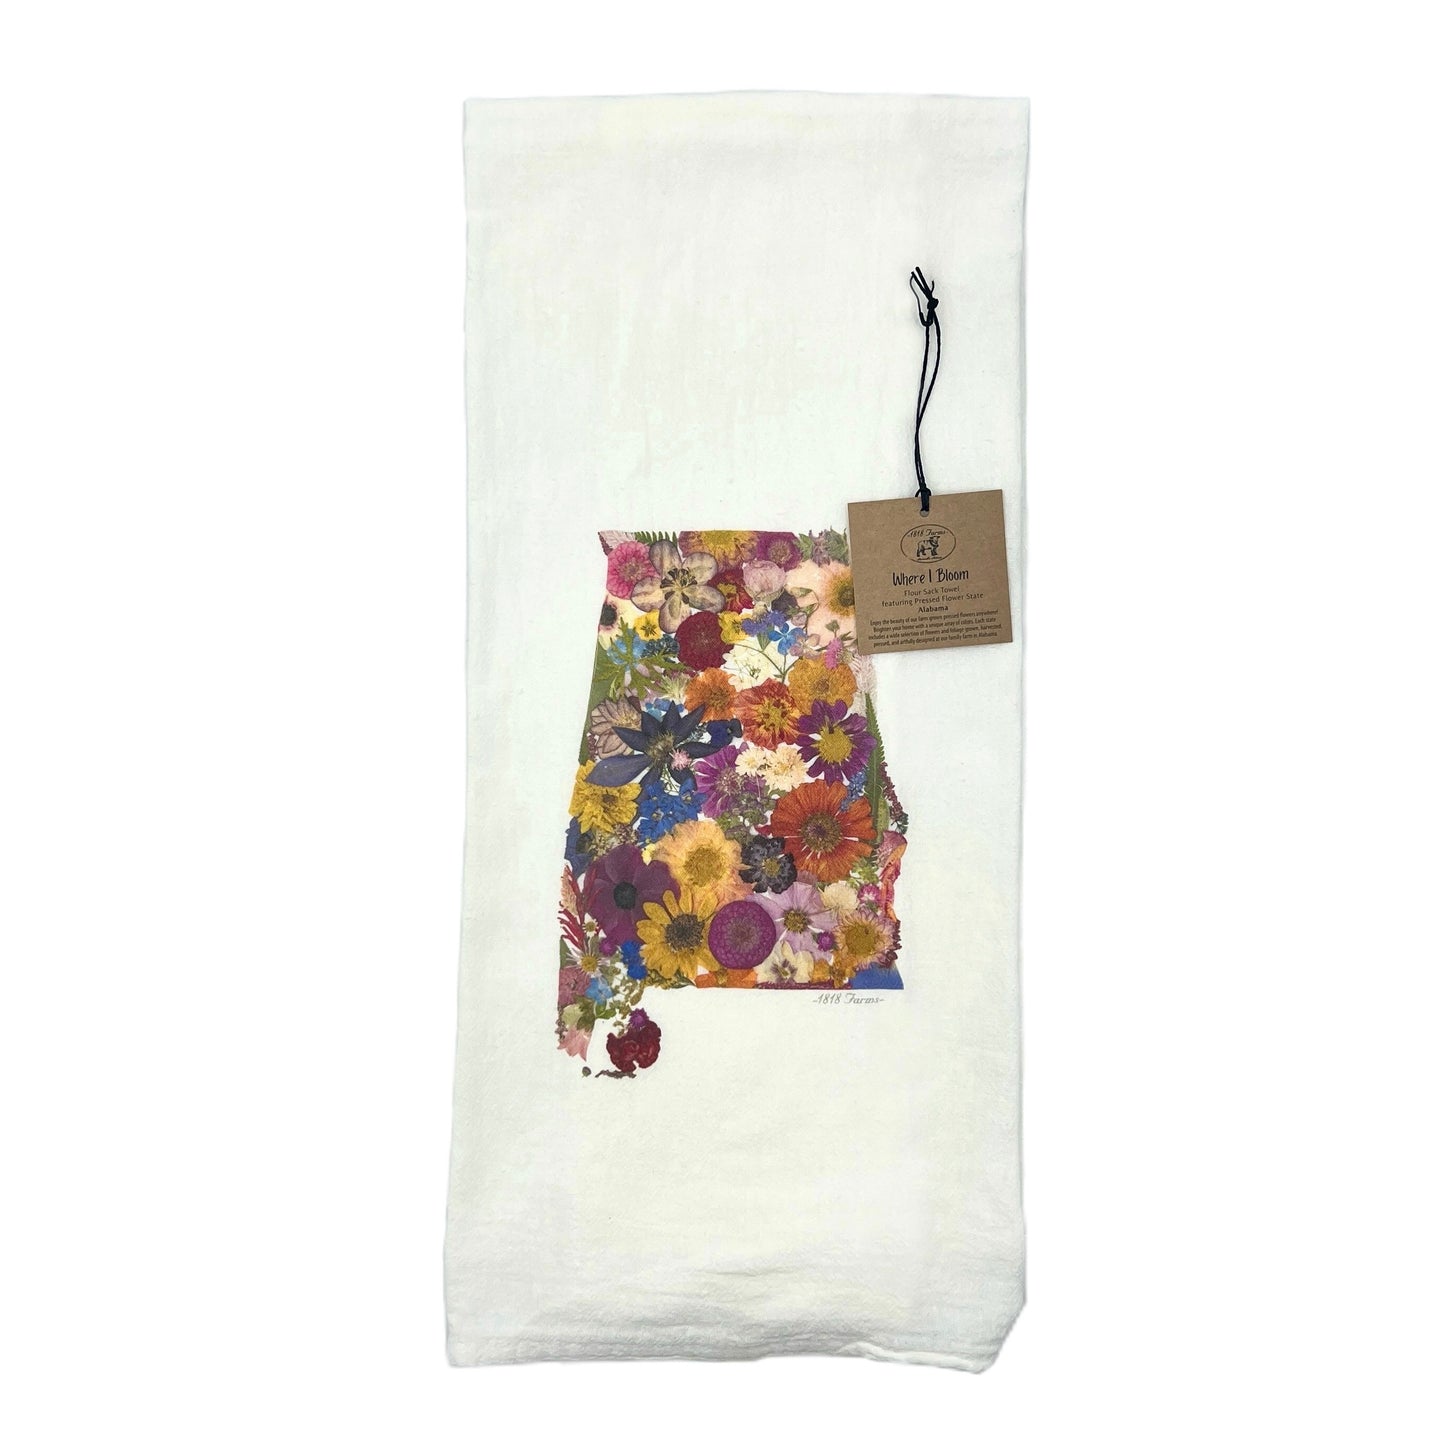 State Themed Flour Sack Towel Featuring Dried, Pressed Flowers - "Where I Bloom" Collection Towel 1818 Farms Alabama  